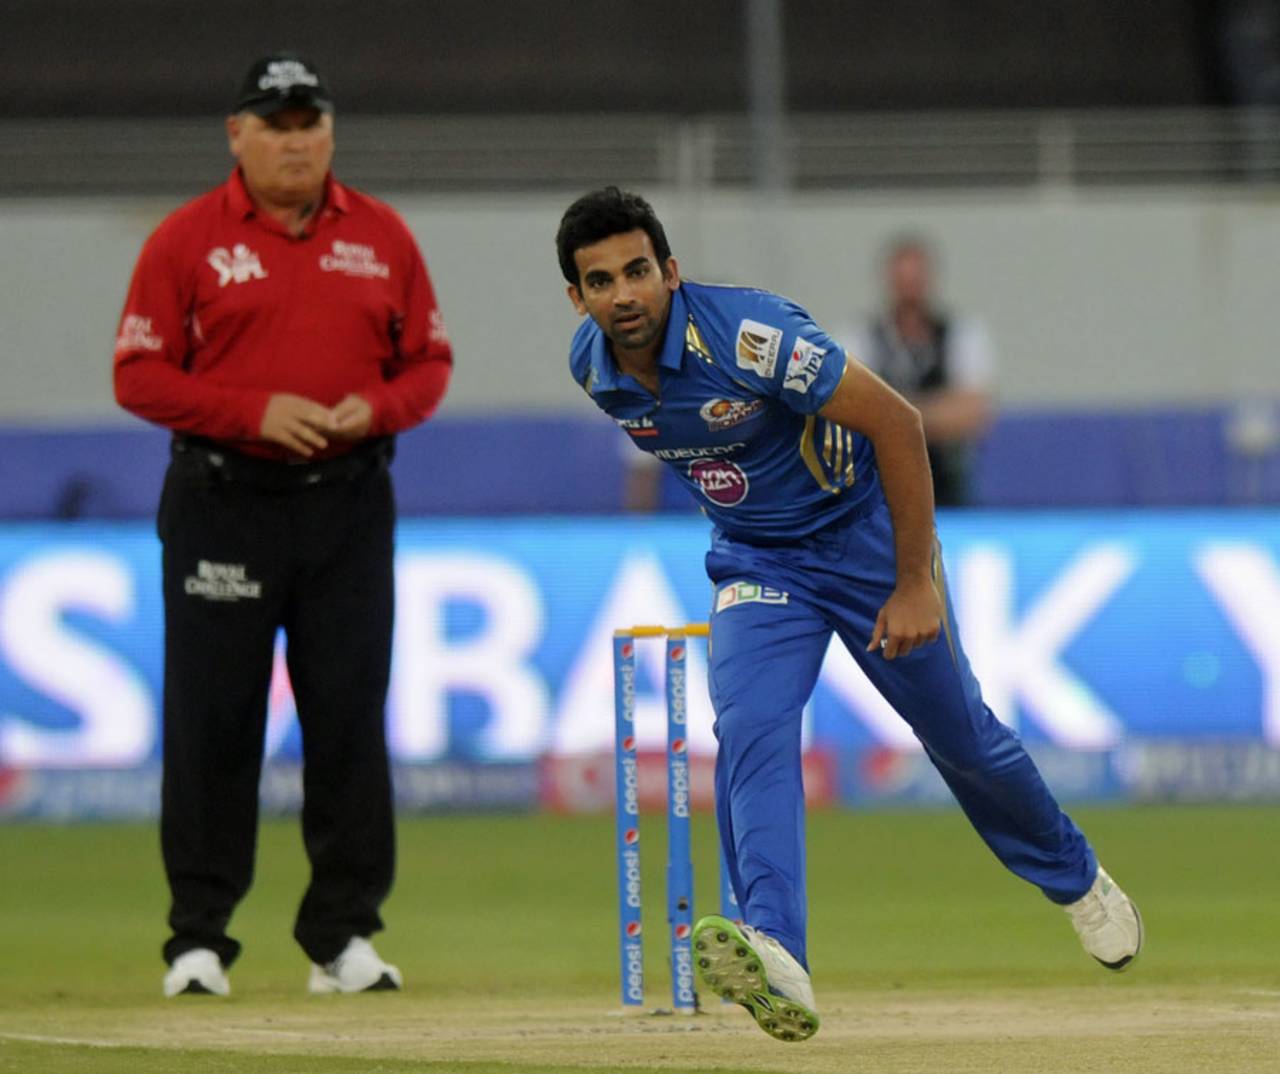 After being left out of India's probables for the World Cup, Zaheer Khan has now been released by Mumbai Indians&nbsp;&nbsp;&bull;&nbsp;&nbsp;BCCI